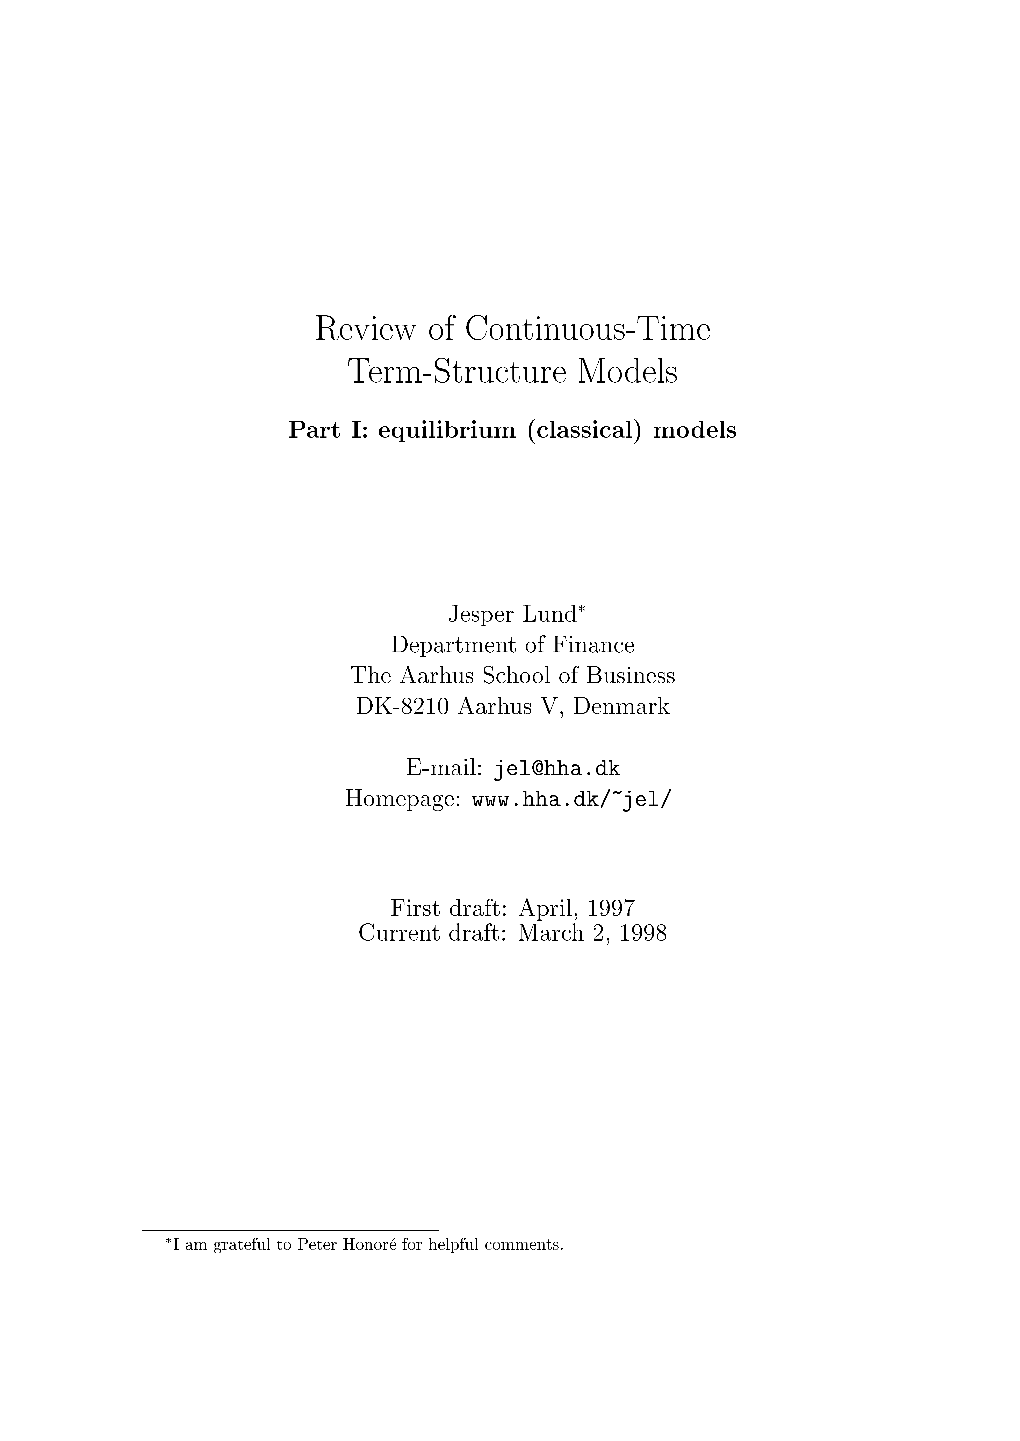 Review of Continuous-Time Term-Structure Models